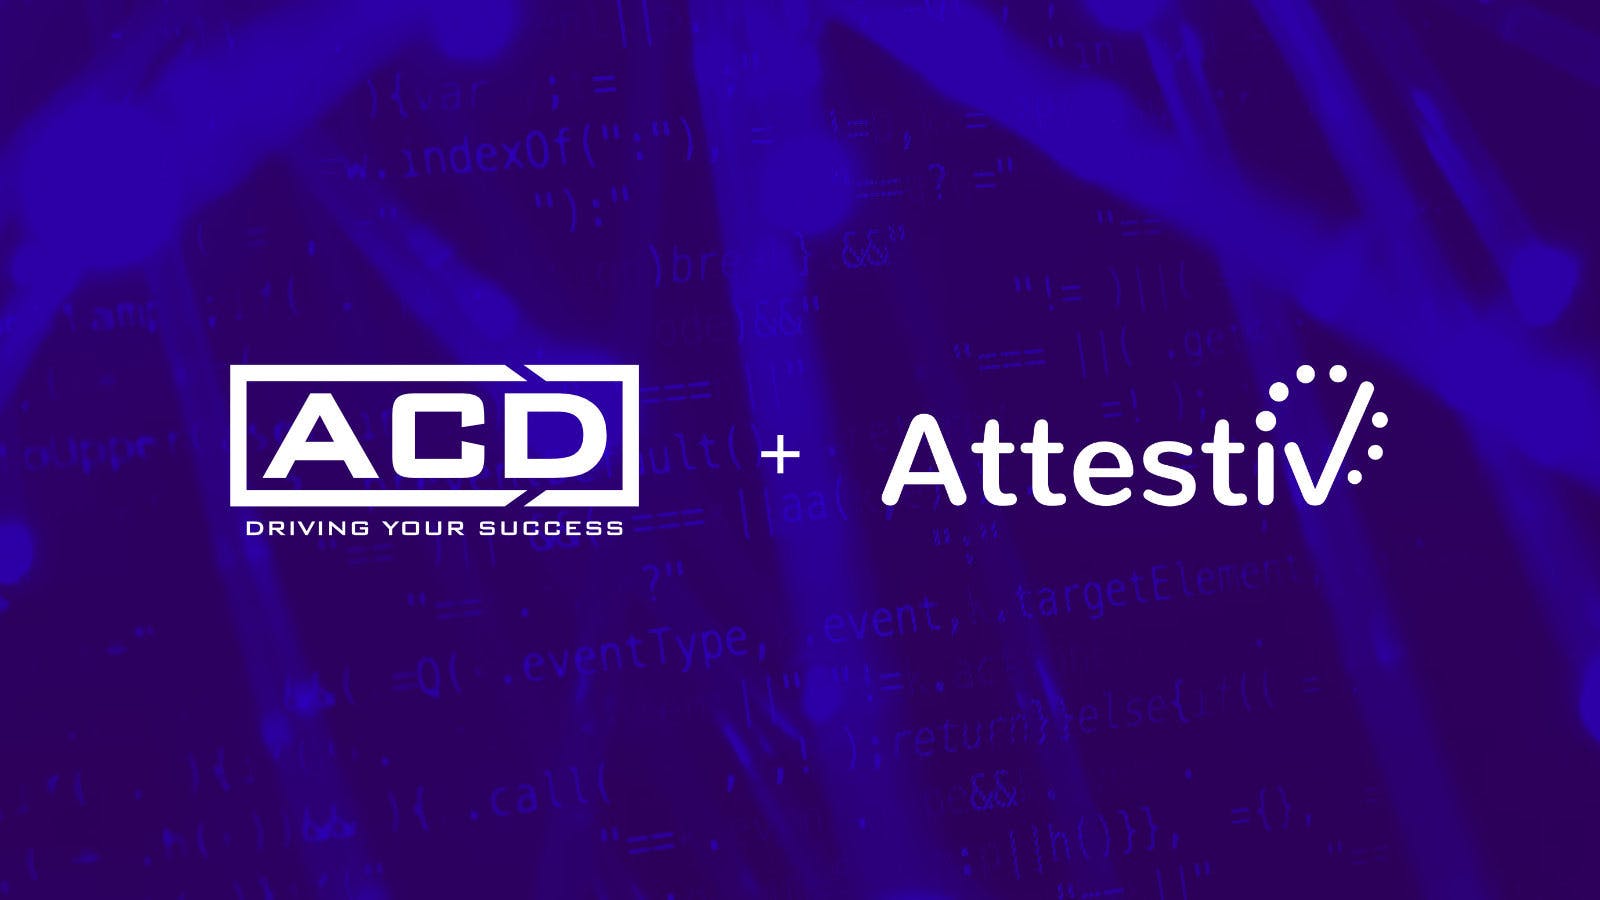 ACD and Attestiv Collaborate to Bring AI Photo Analysis and Authenticity into Claims Operations for Fraud Prevention